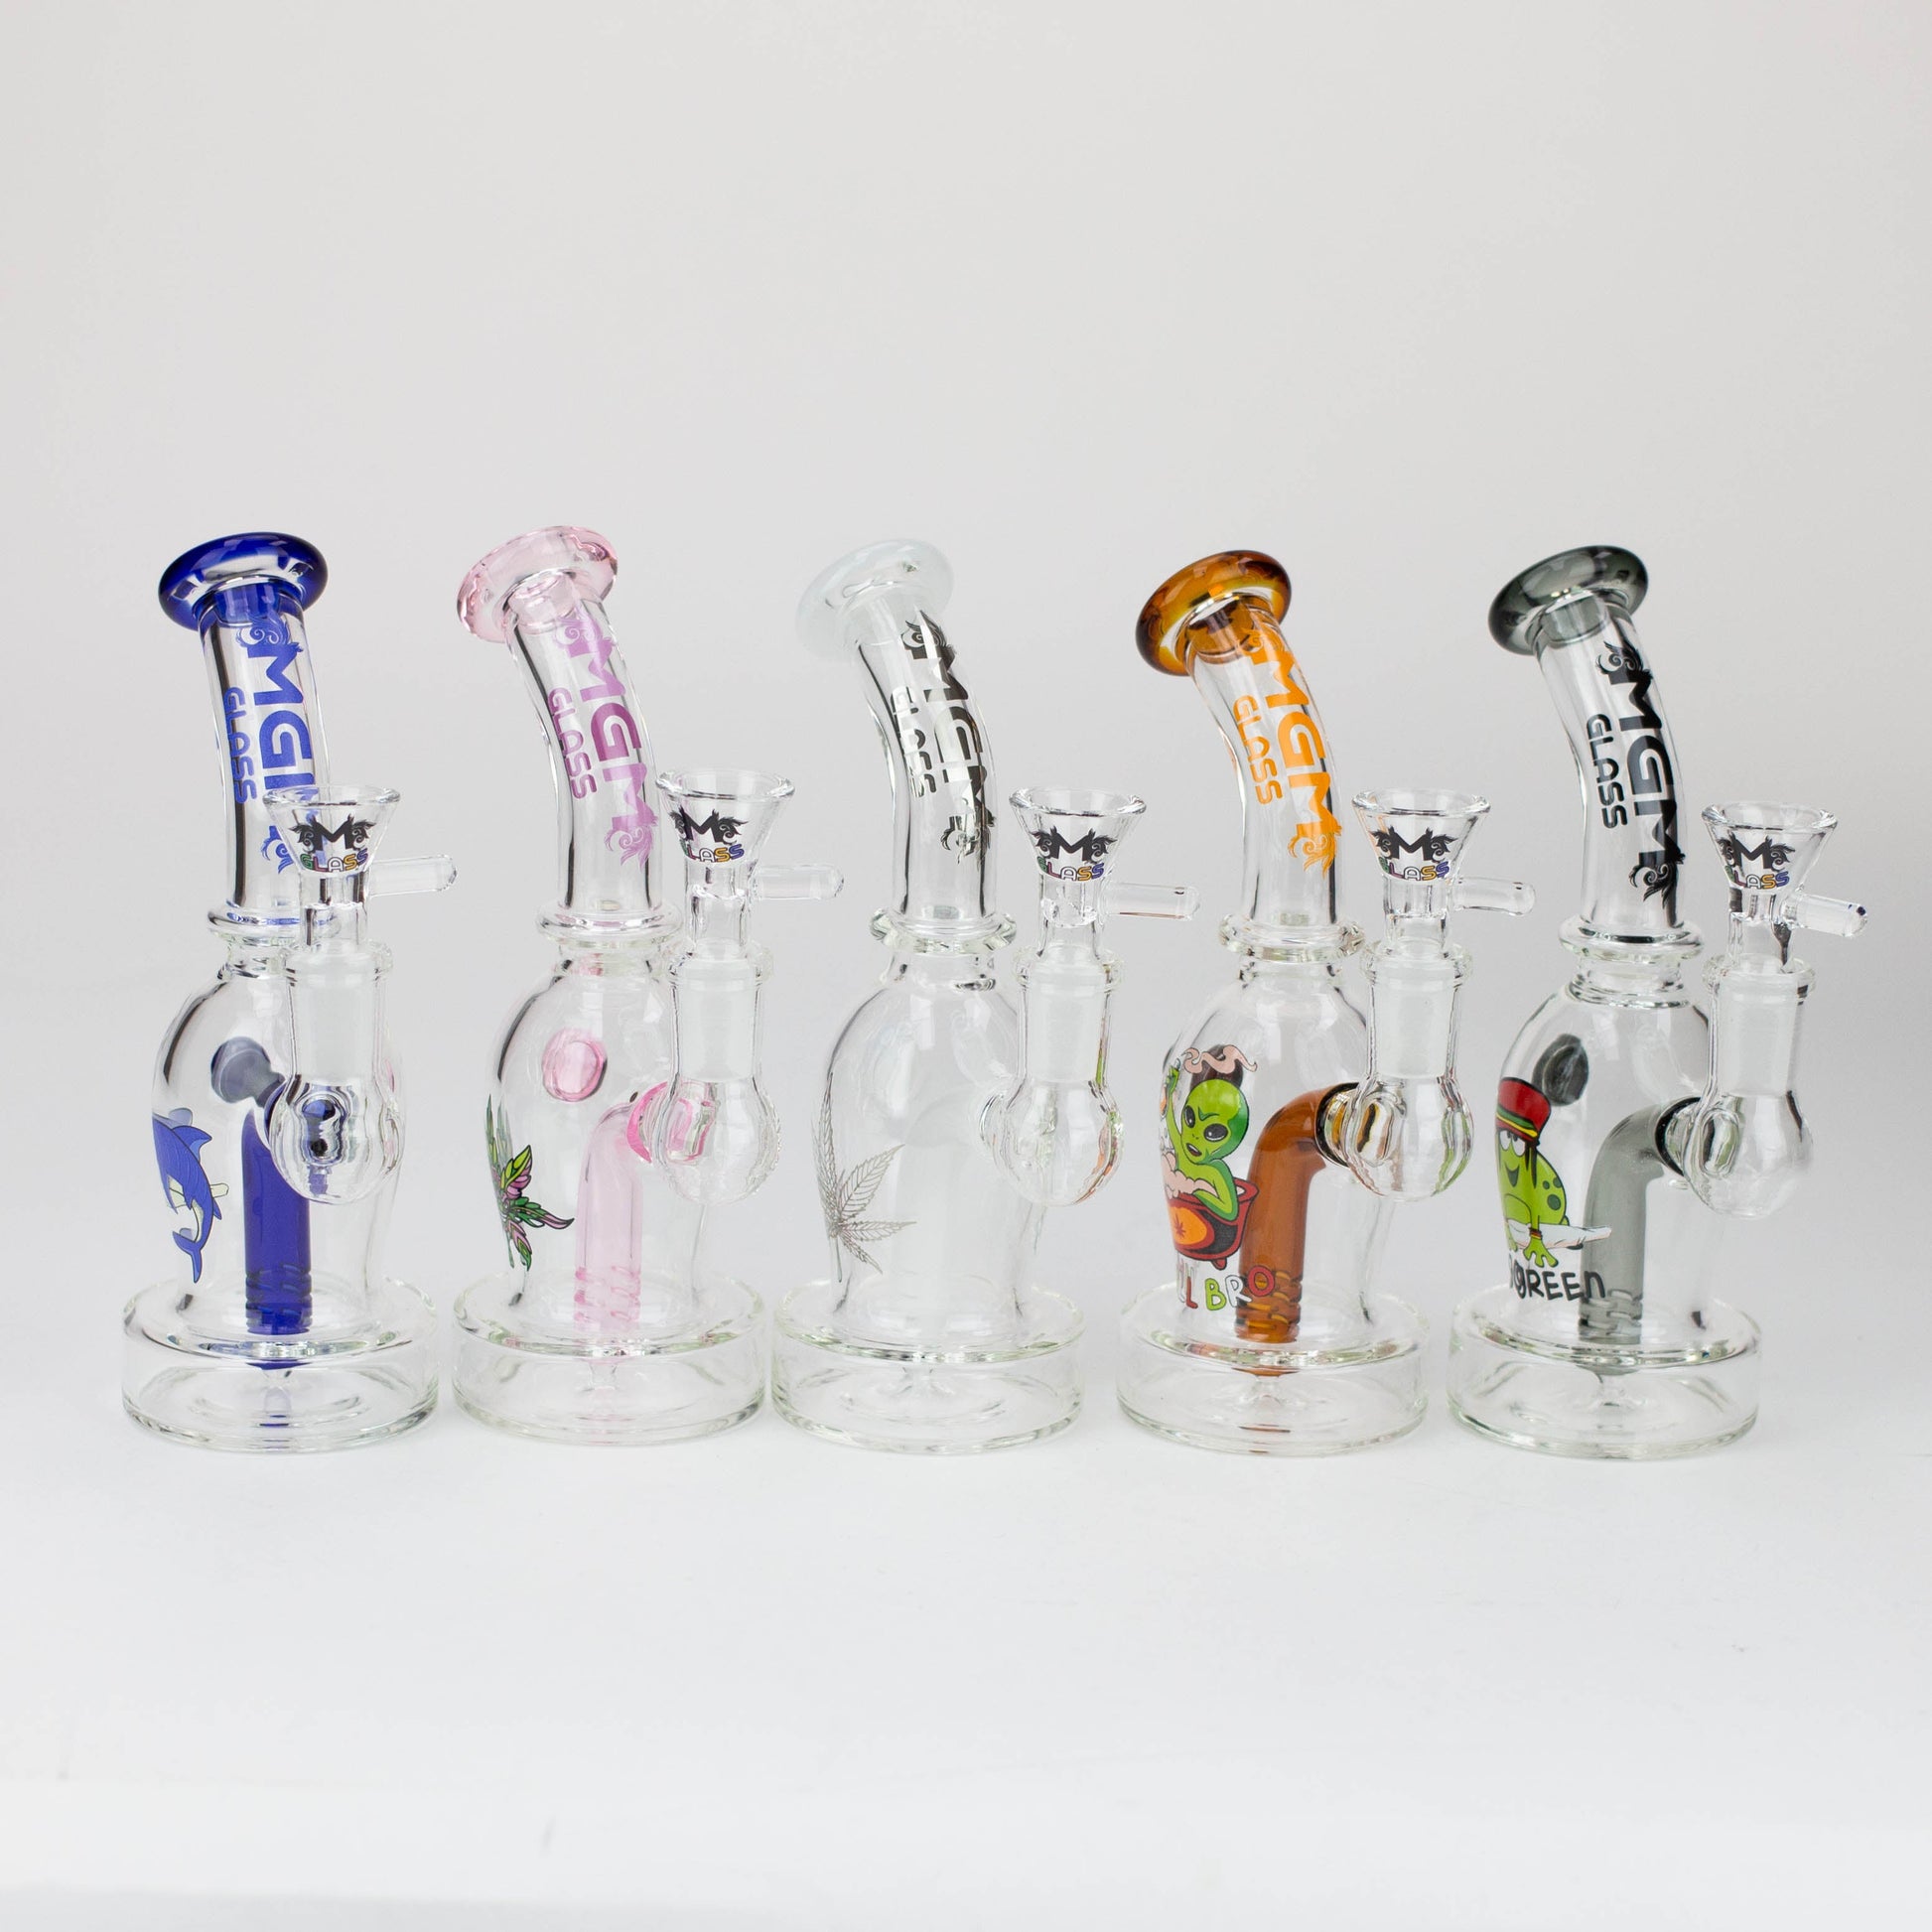 6.5" MGM Glass 2-in-1 bubbler with Graphic [C2673]_4